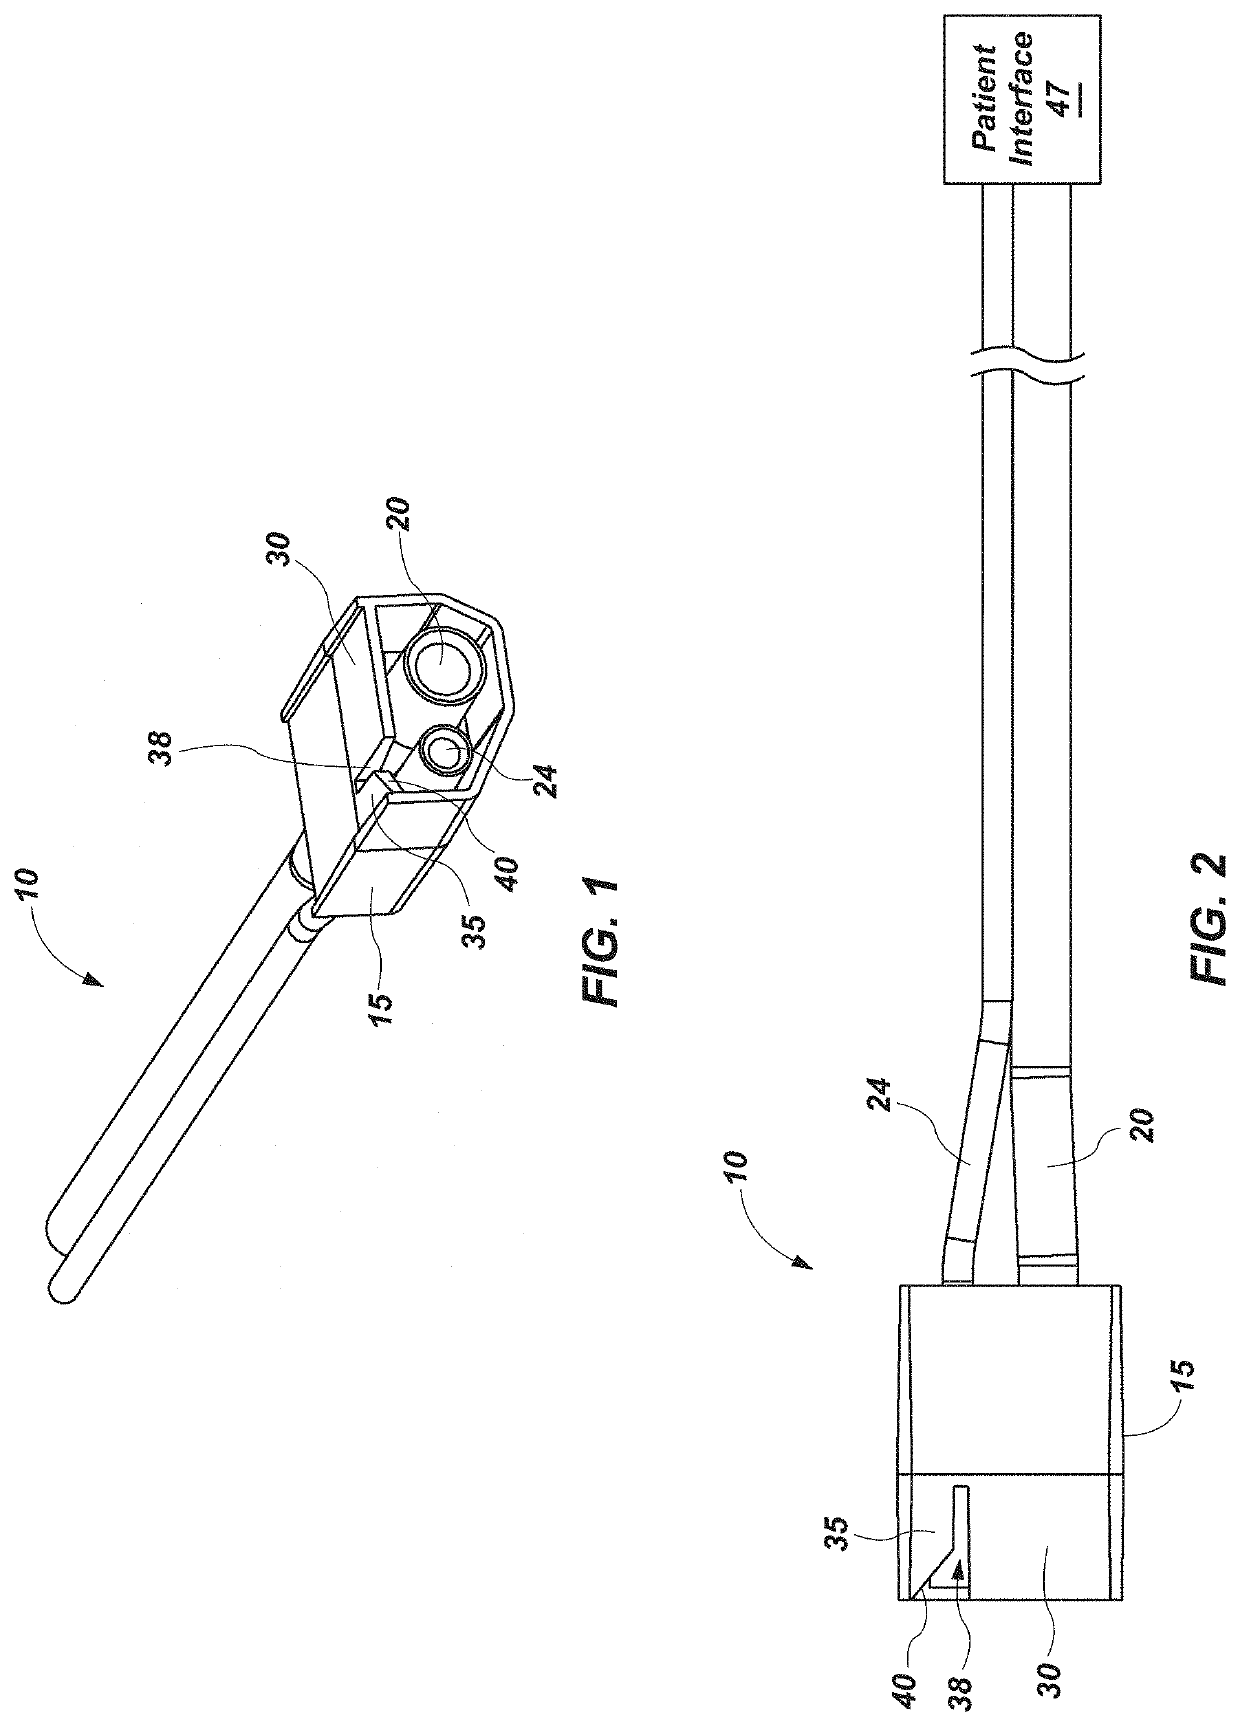 Apparatus for connecting oxygen delivery control instrument to patient delivery device